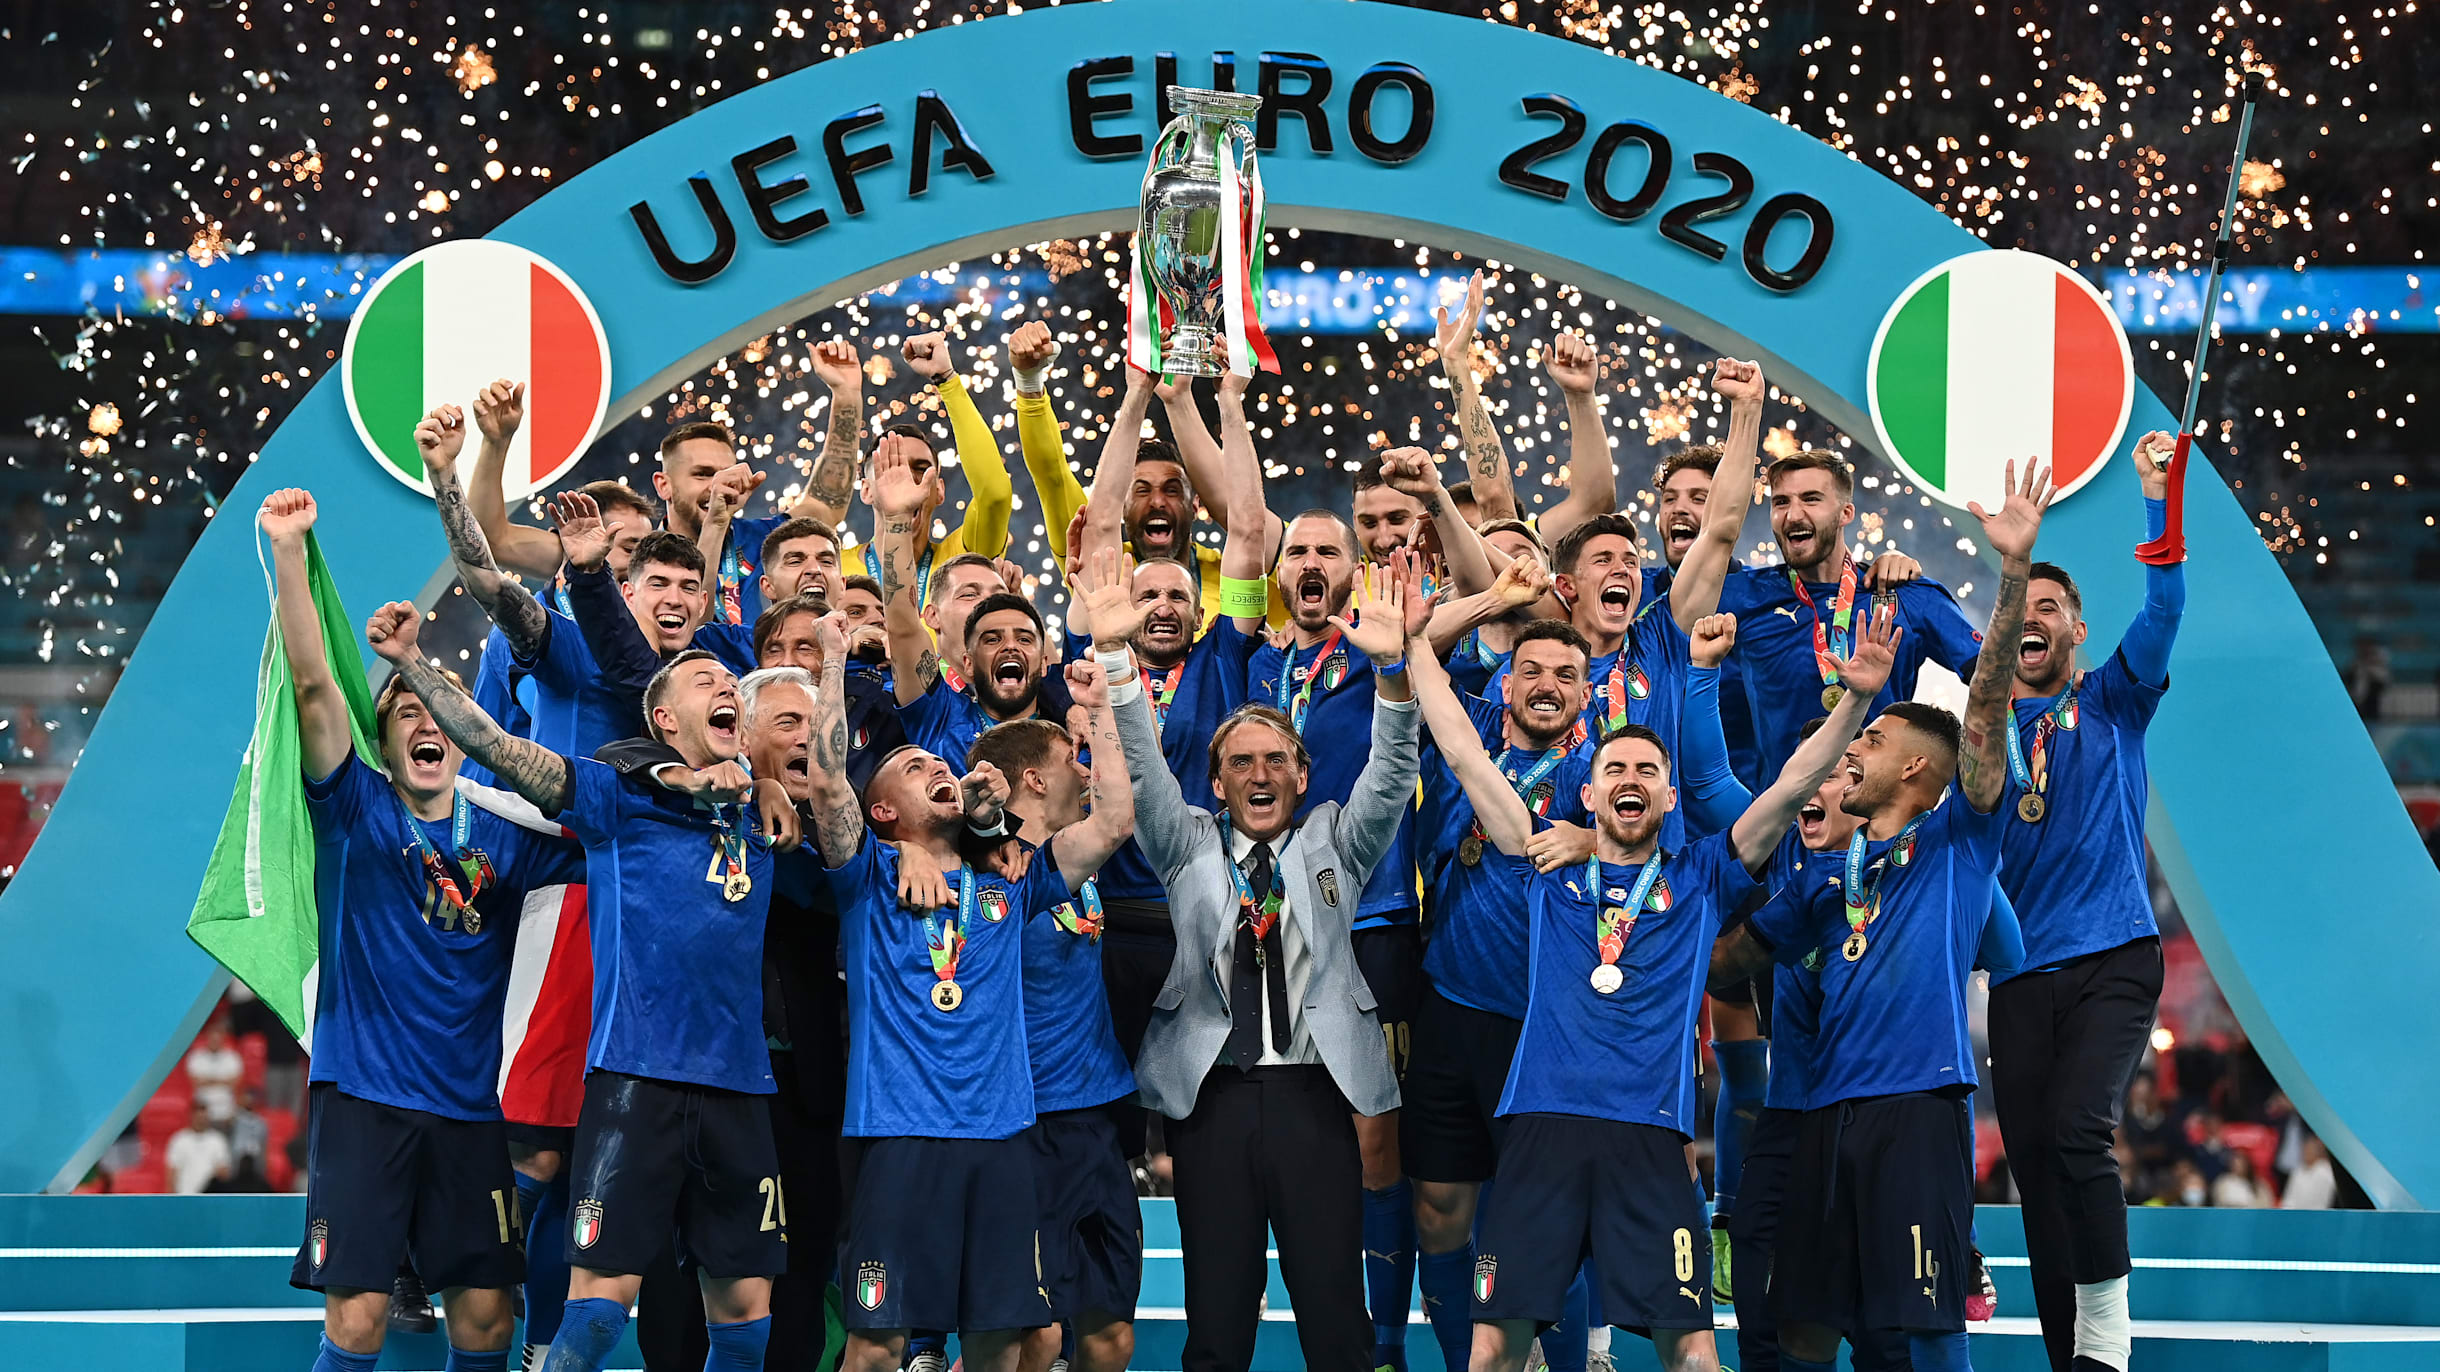 UEFA European Championship winners: Know all the